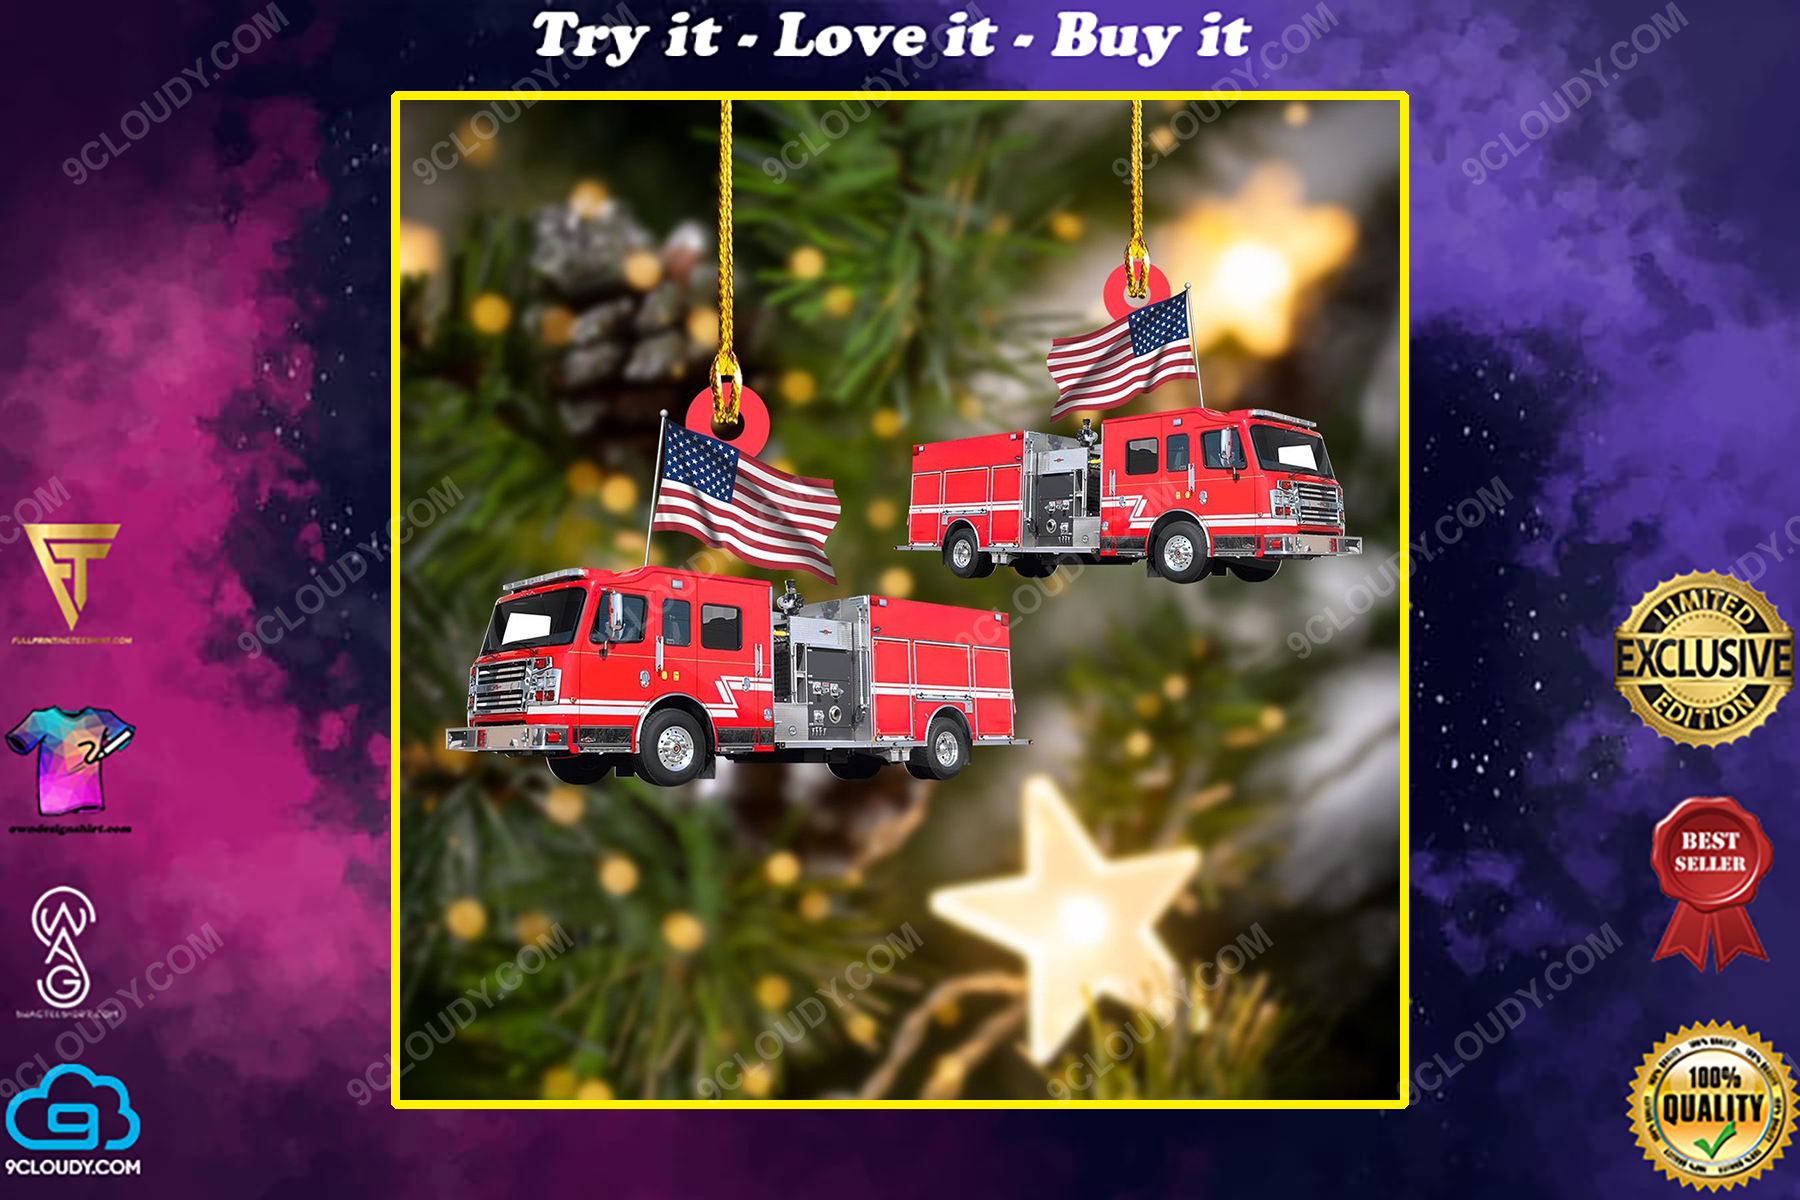 Fire engine firefighter and american flag christmas gift ornament